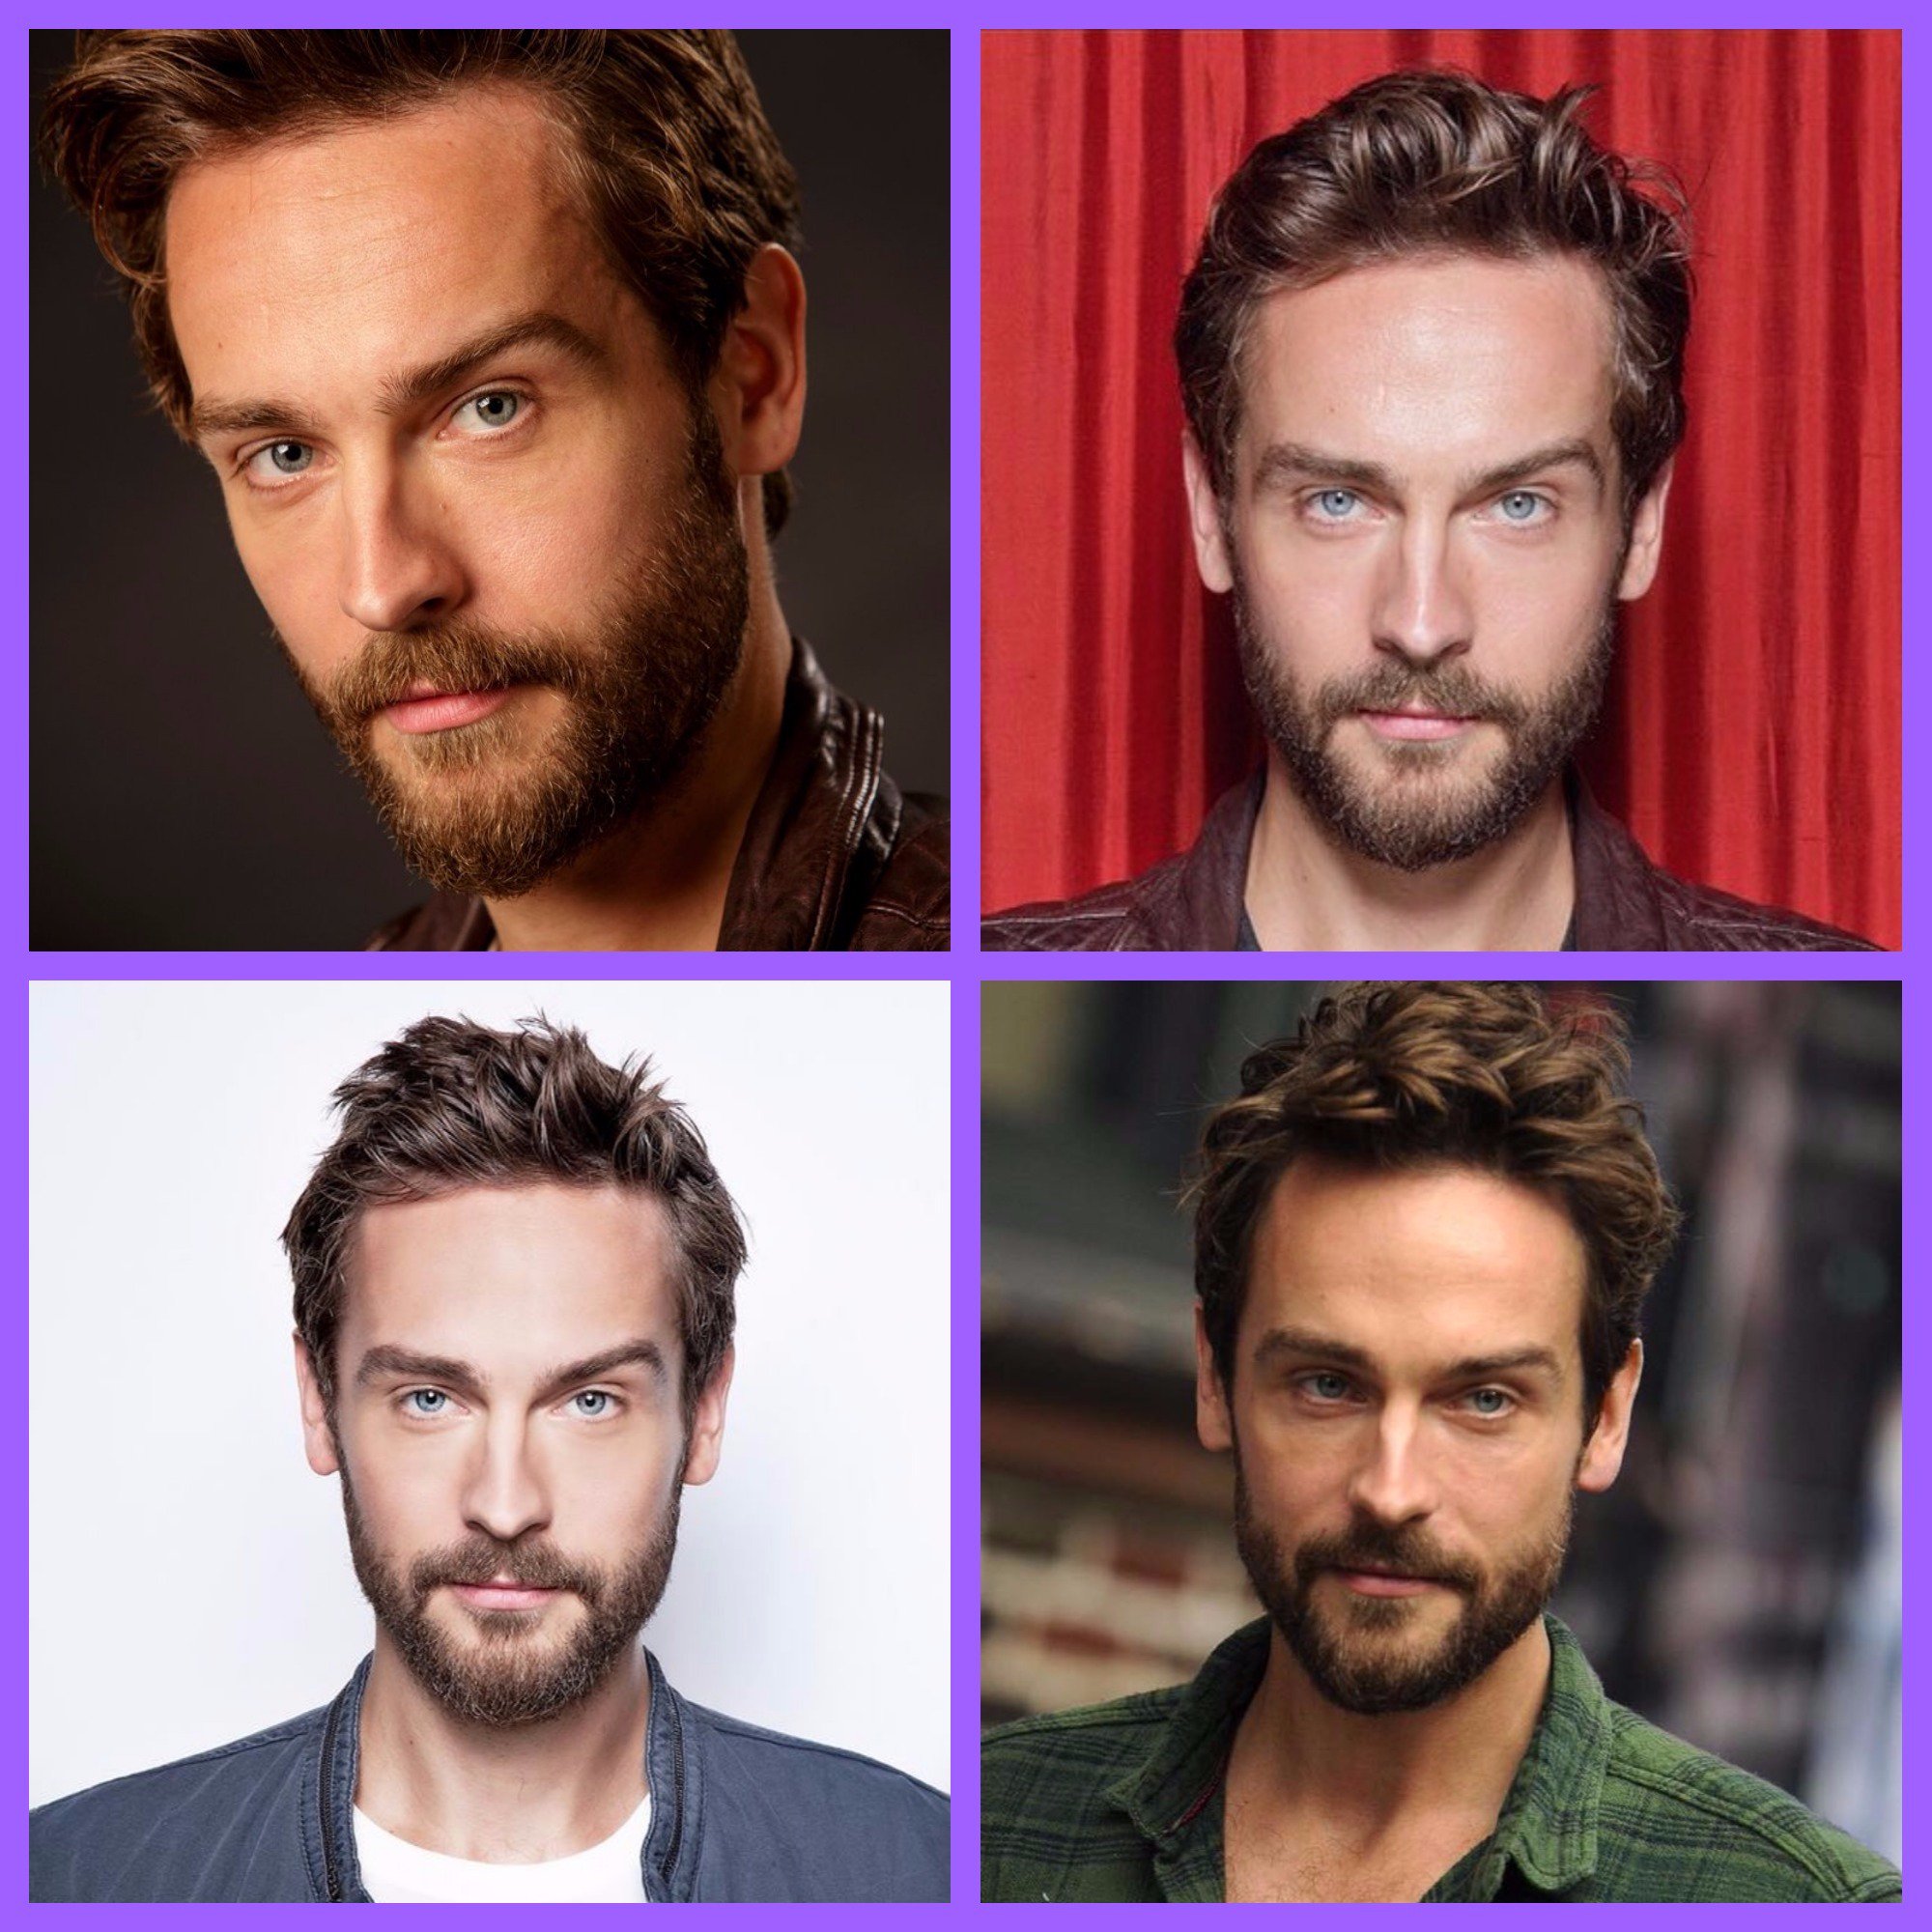 And also Happy Birthday to the lovely Tom Mison 